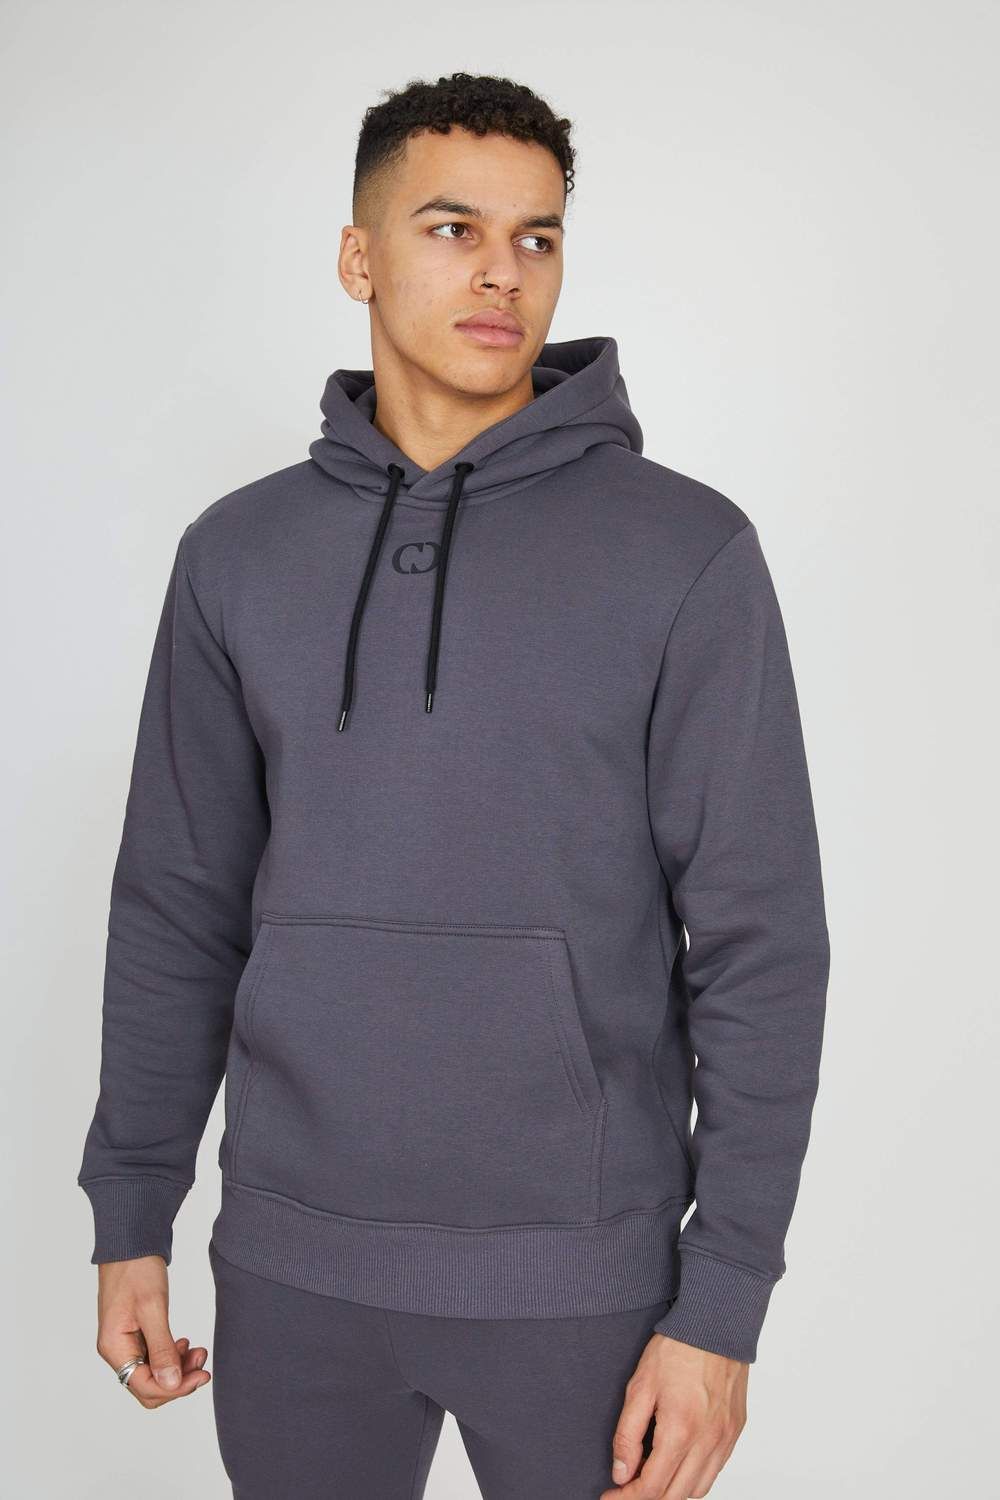 ESSENTIAL HOOD - CHARCOAL - 80% COTTON, 20% POLYESTER